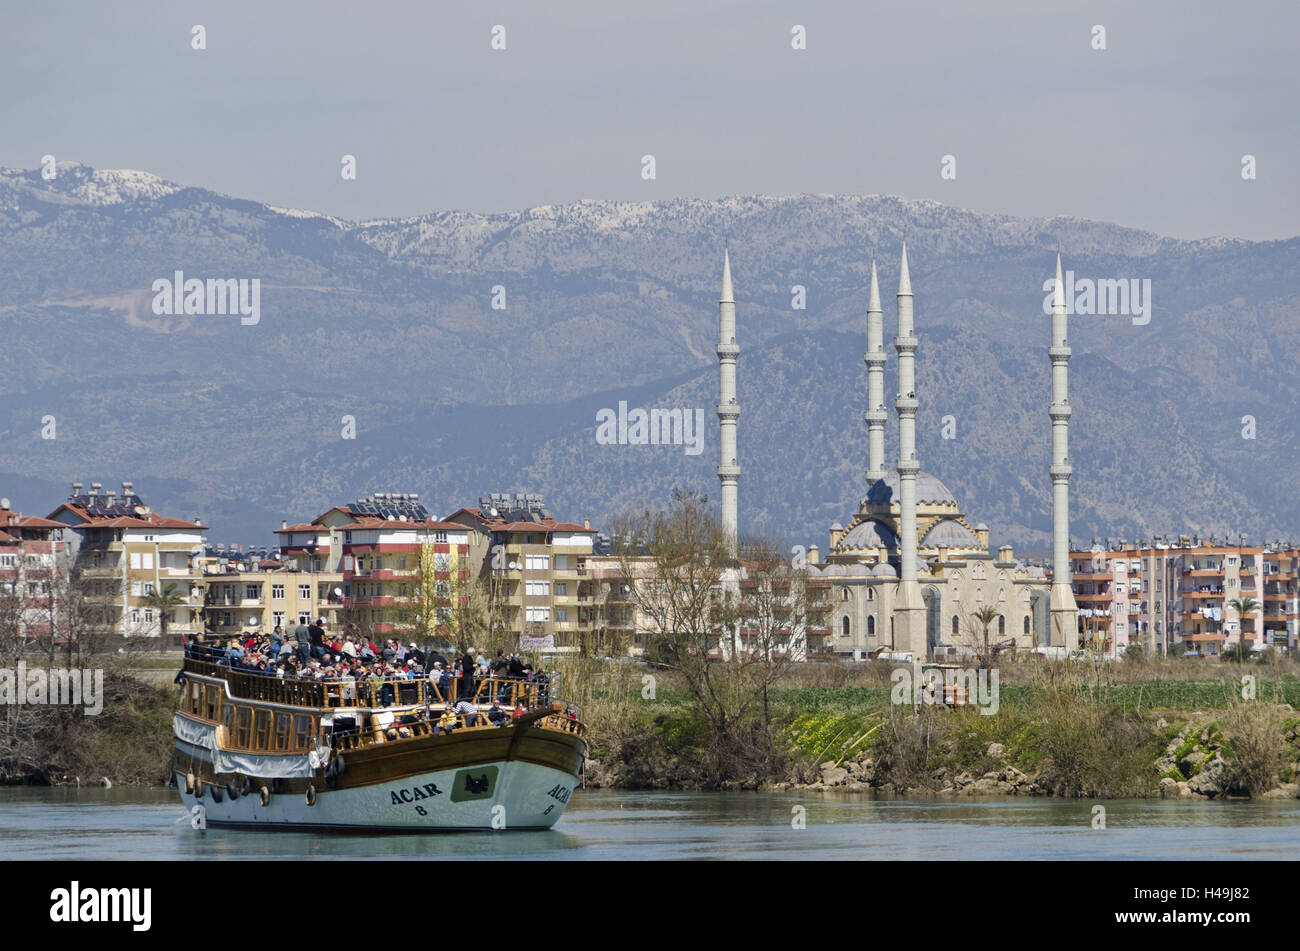 Turkey, south coast, province of Antalya, Manavgat, river, excursion steamer, tourist, tourists, mosque, Manavgat river, steamboat, holiday ships, ships, people, river scenery, tourism, ship excursion, excursion, minarets, towers, houses, buildings, mount Stock Photo